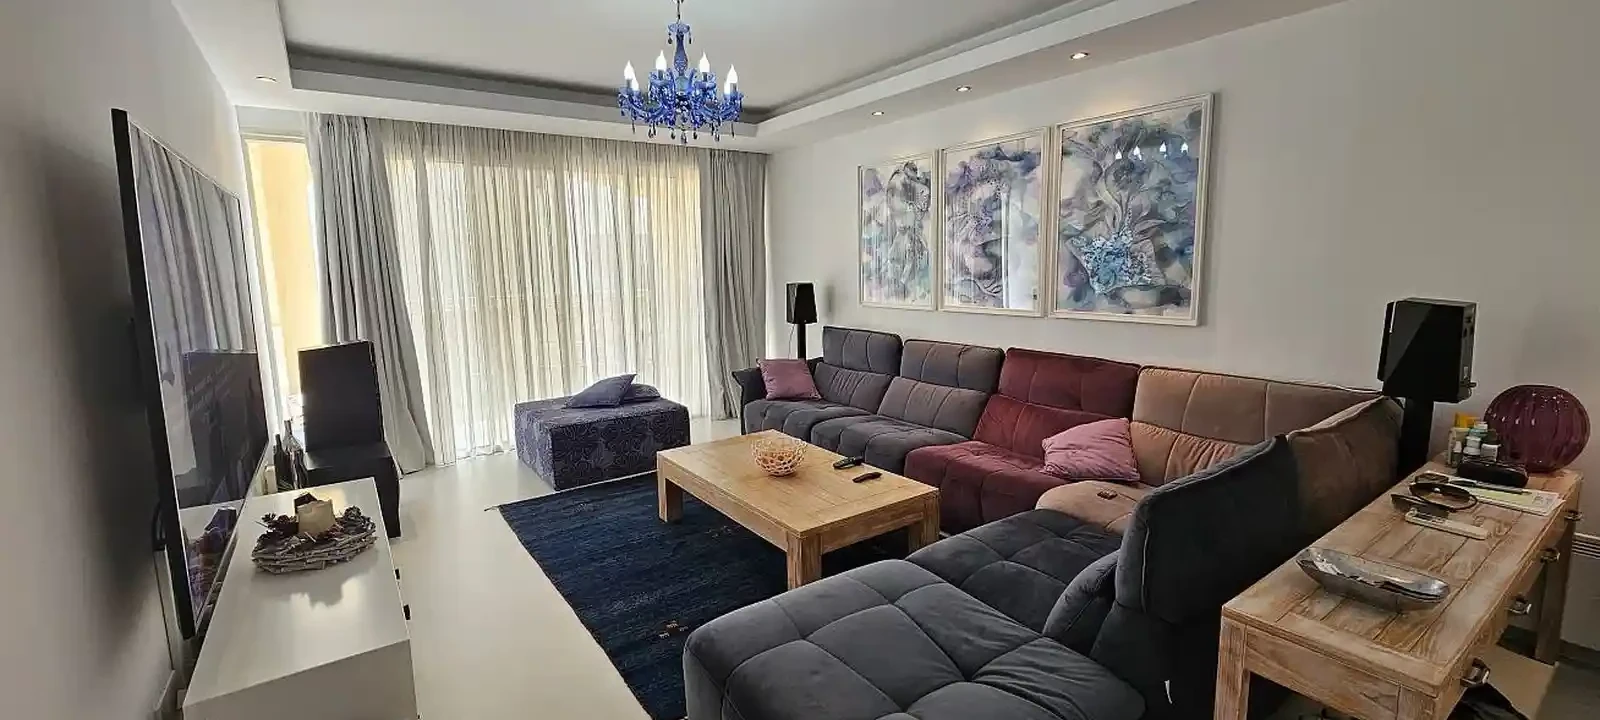 3-bedroom penthouse to rent €4.200, image 1